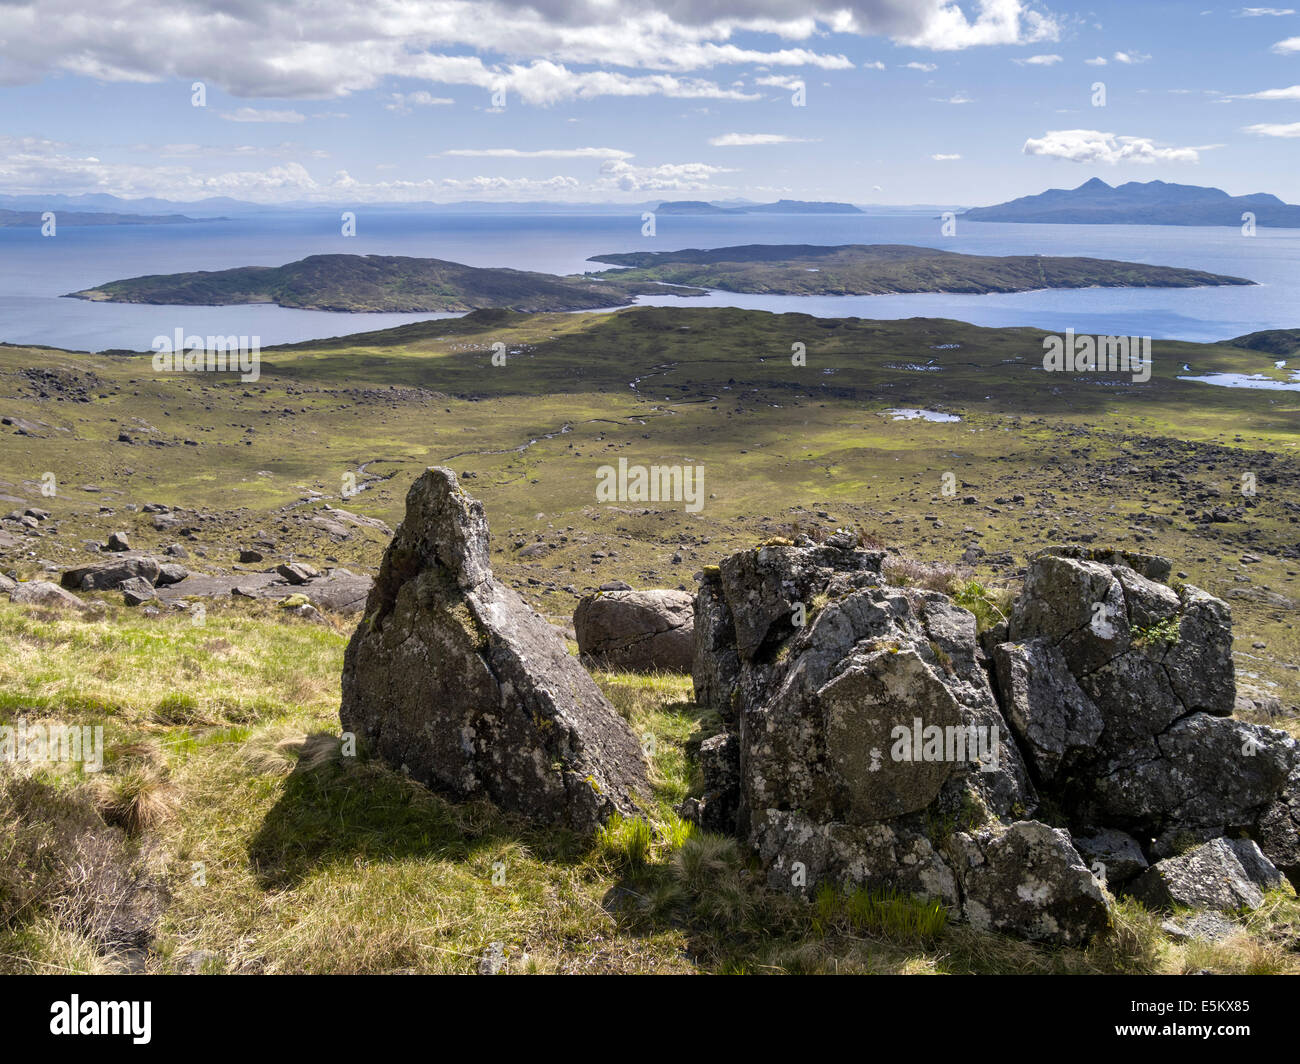 Rocky slopes of Sron na Ciche on Skye with the Hebridean Islands of Soay, Eigg and Rum beyond, Glenbrittle, Scotland, UK Stock Photo